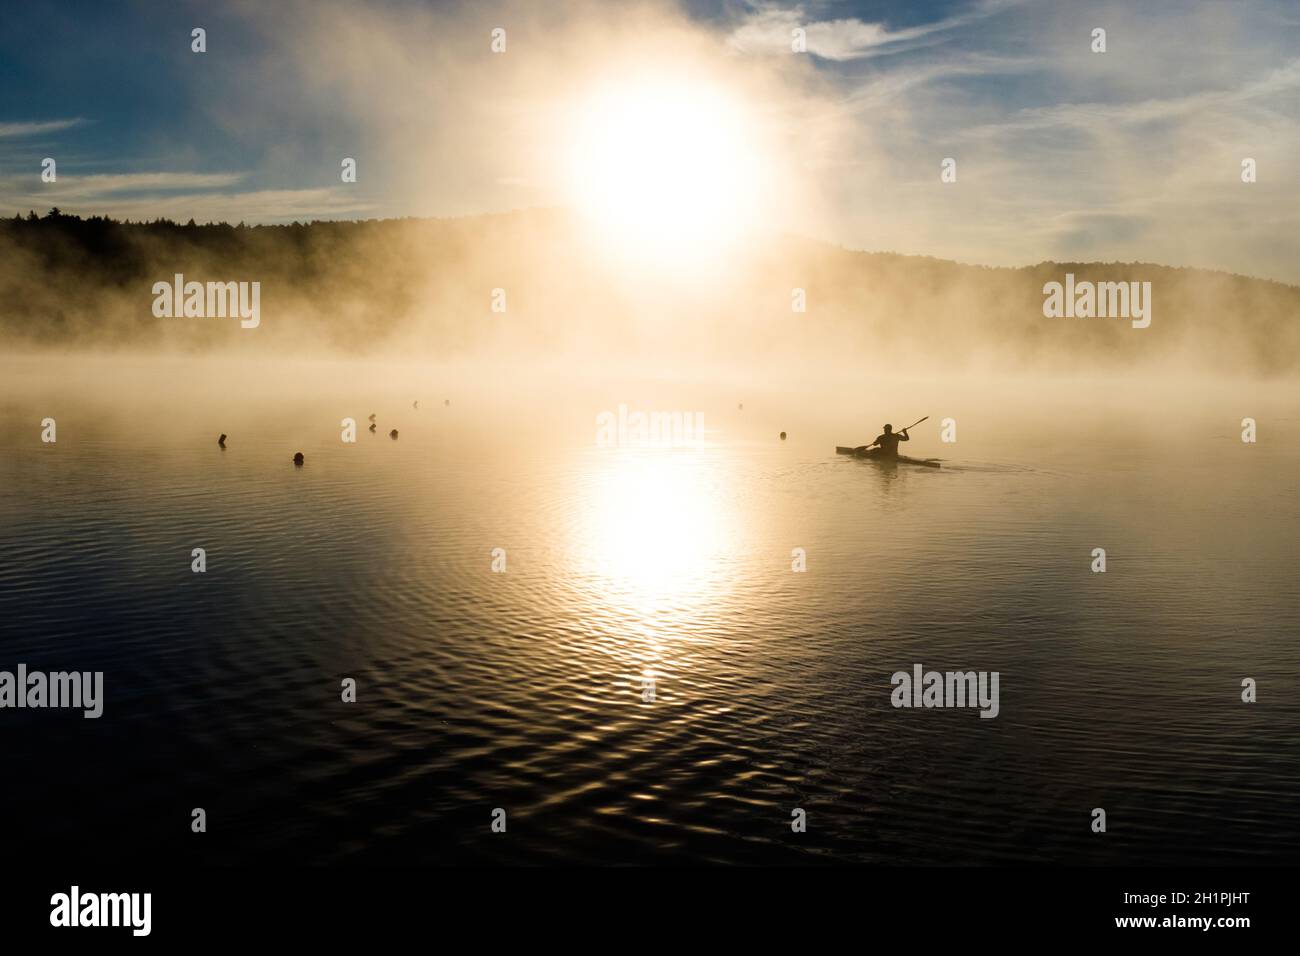 Kayakers silhouetted by the rising sun on Lake Iroquois in Vermont,  USA, New England, on a misty September morning. Stock Photo